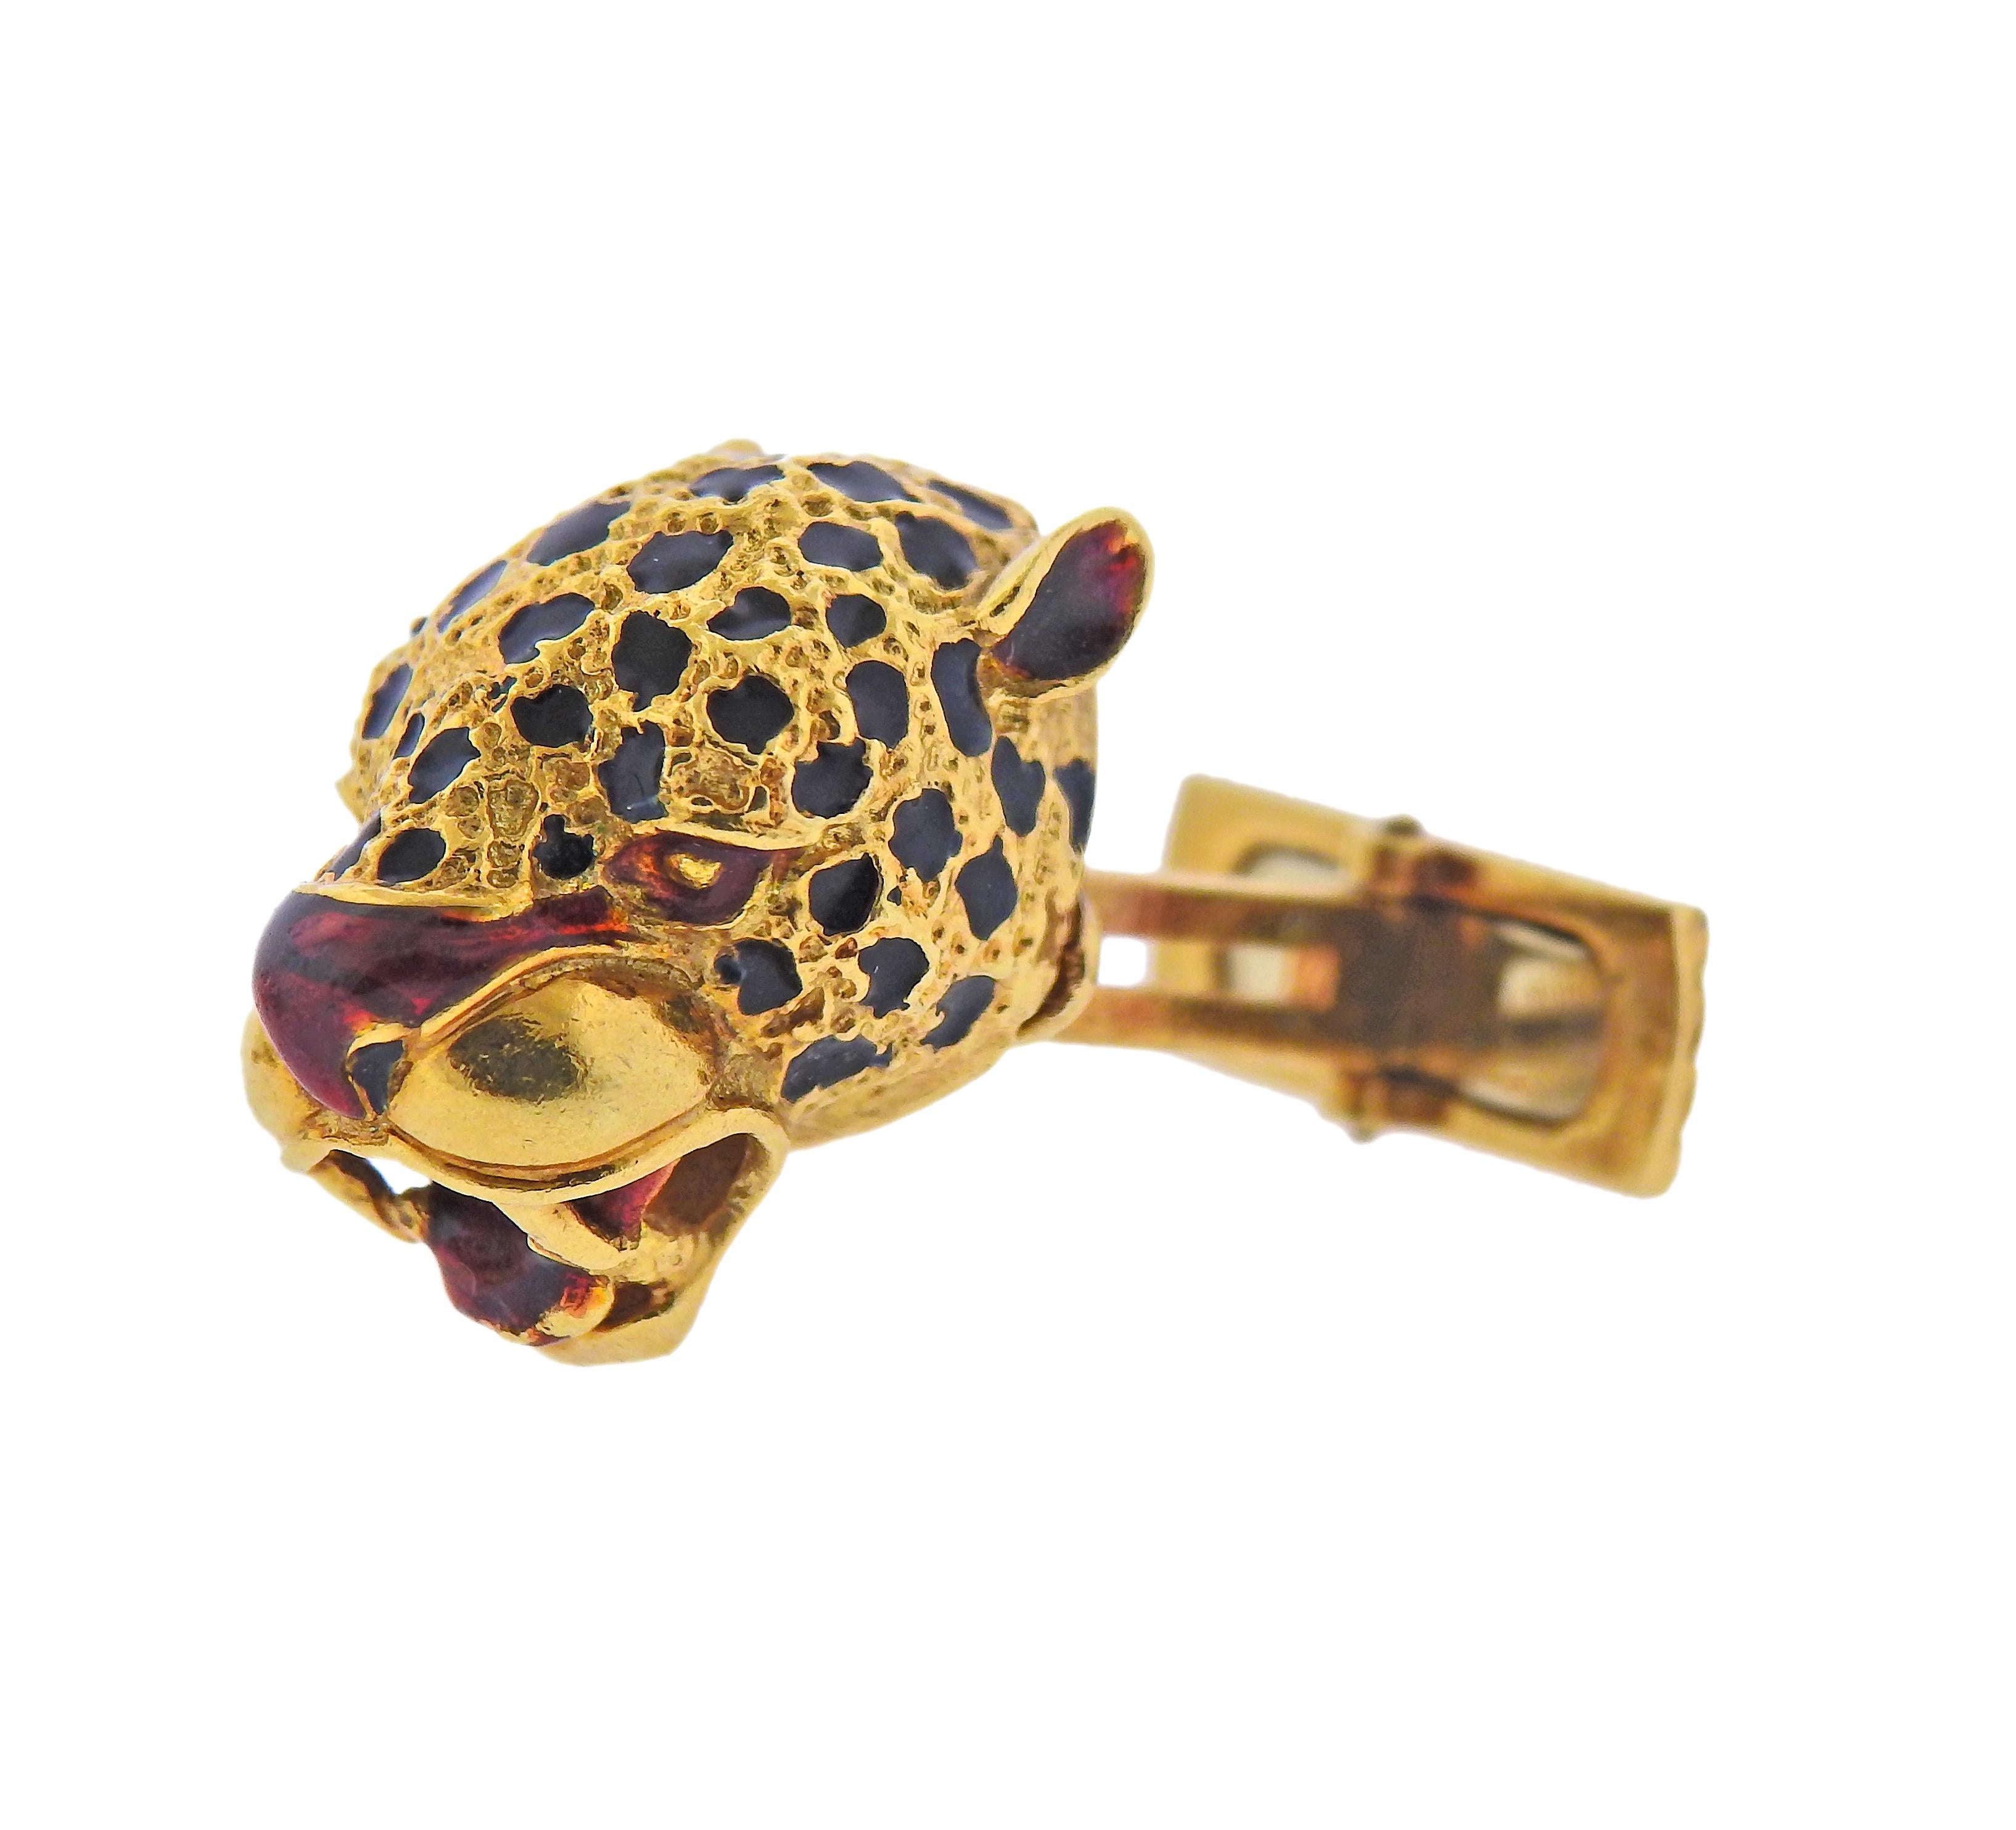 Pair of 18k yellow gold jaguar cufflinks, decorated with enamel. Cufflink top is 20mm x 16mm. Weight - 20 grams. 